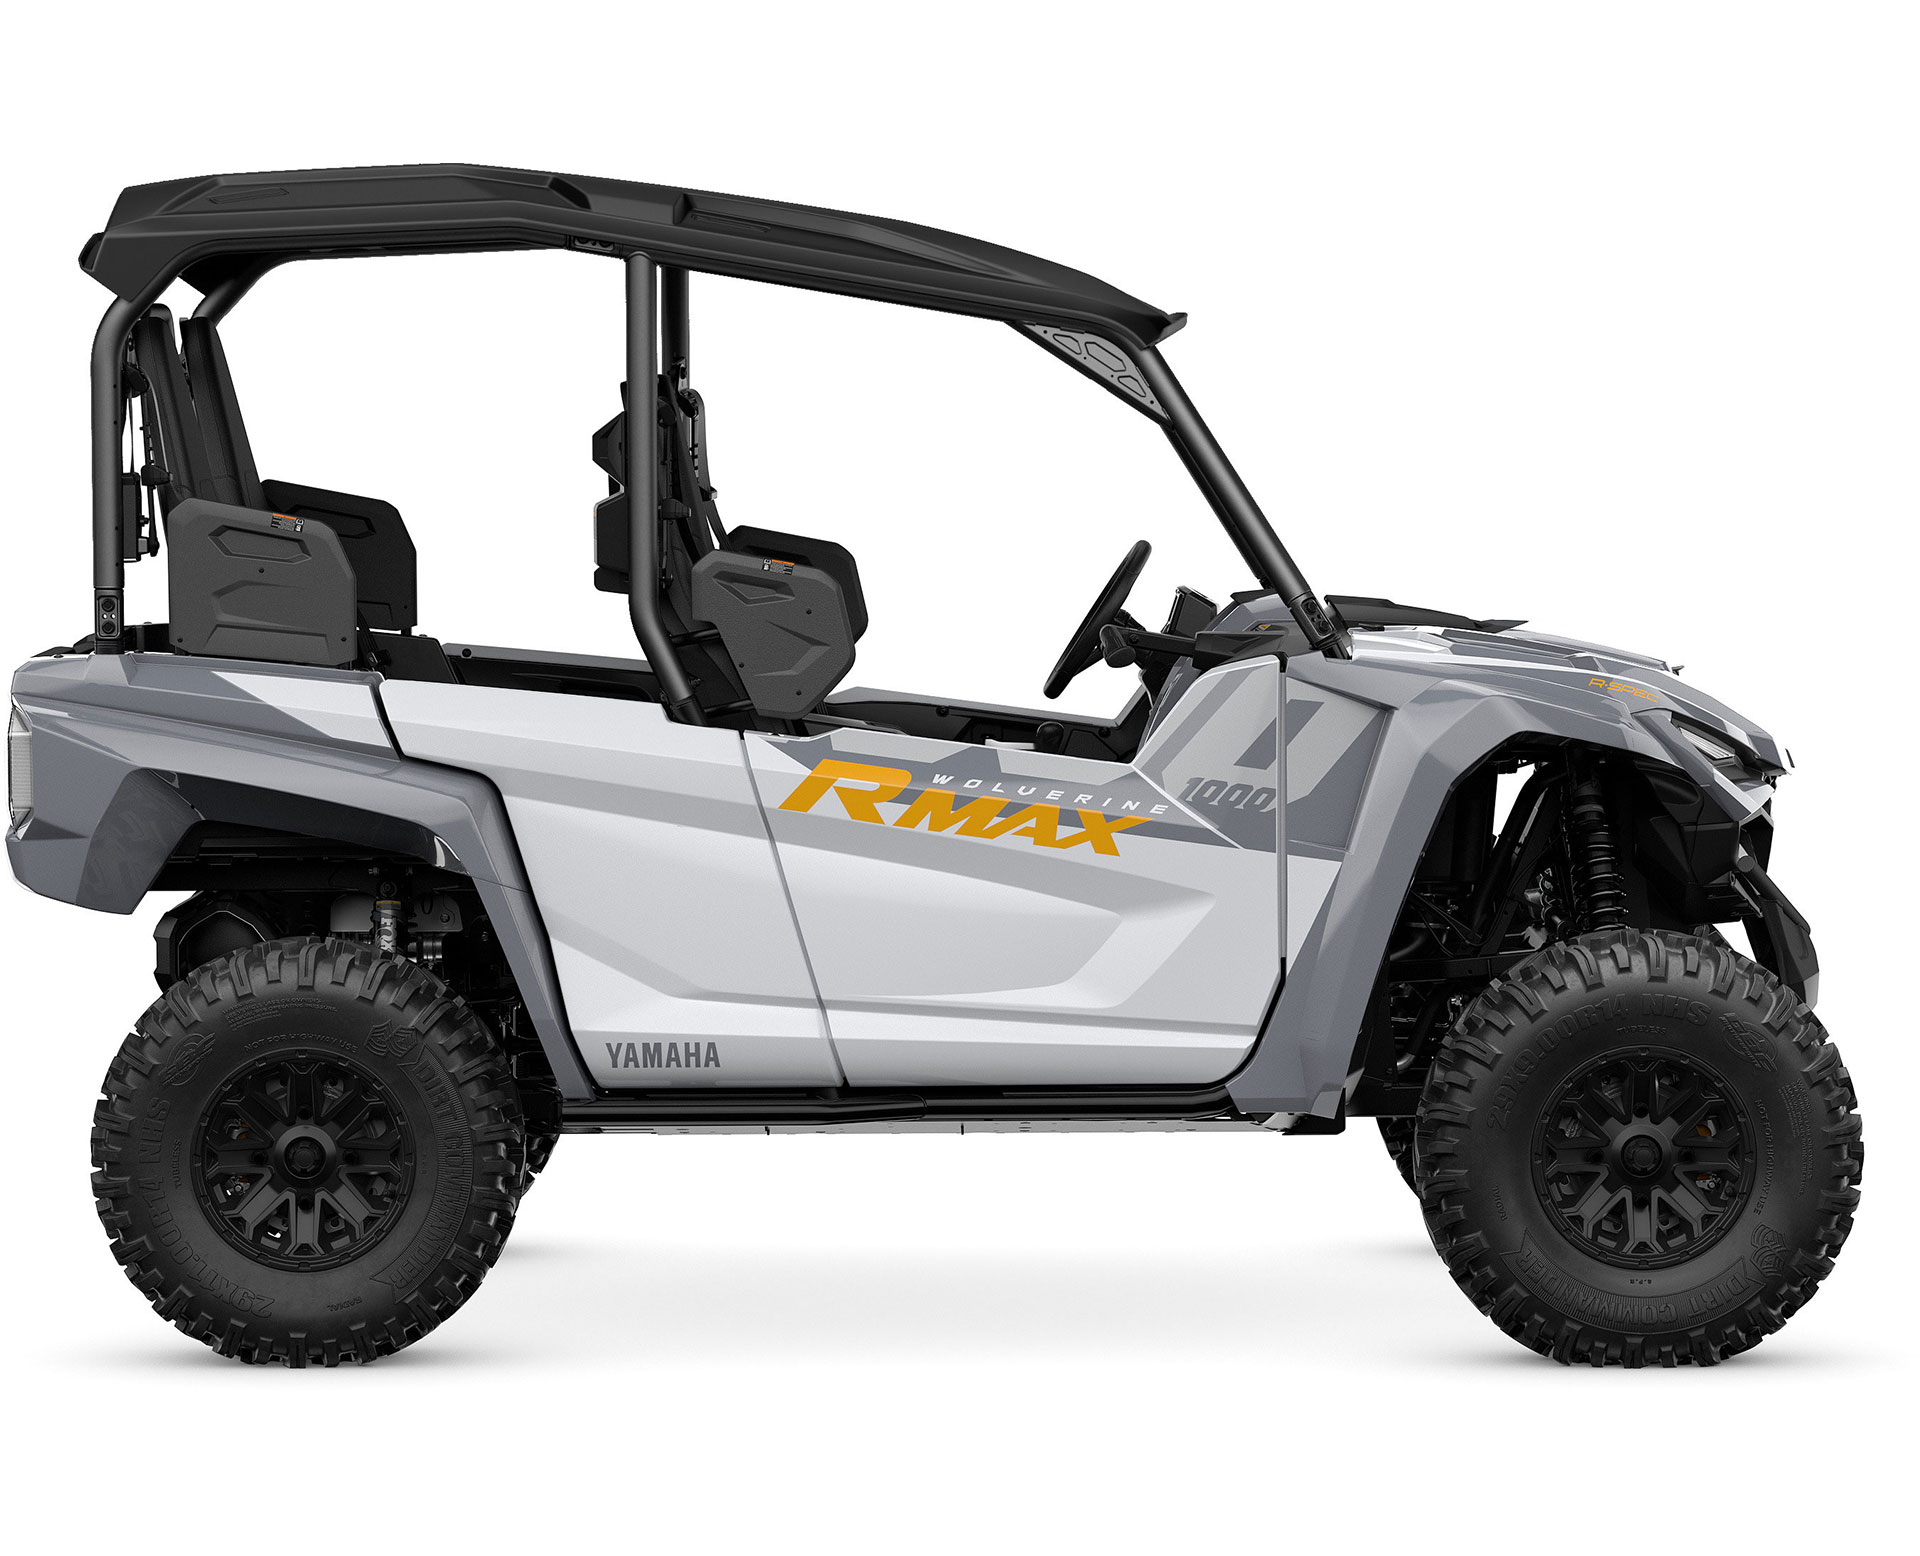 Thumbnail of your customized 2024 WOLVERINE® RMAX4™ 1000 R-Spec